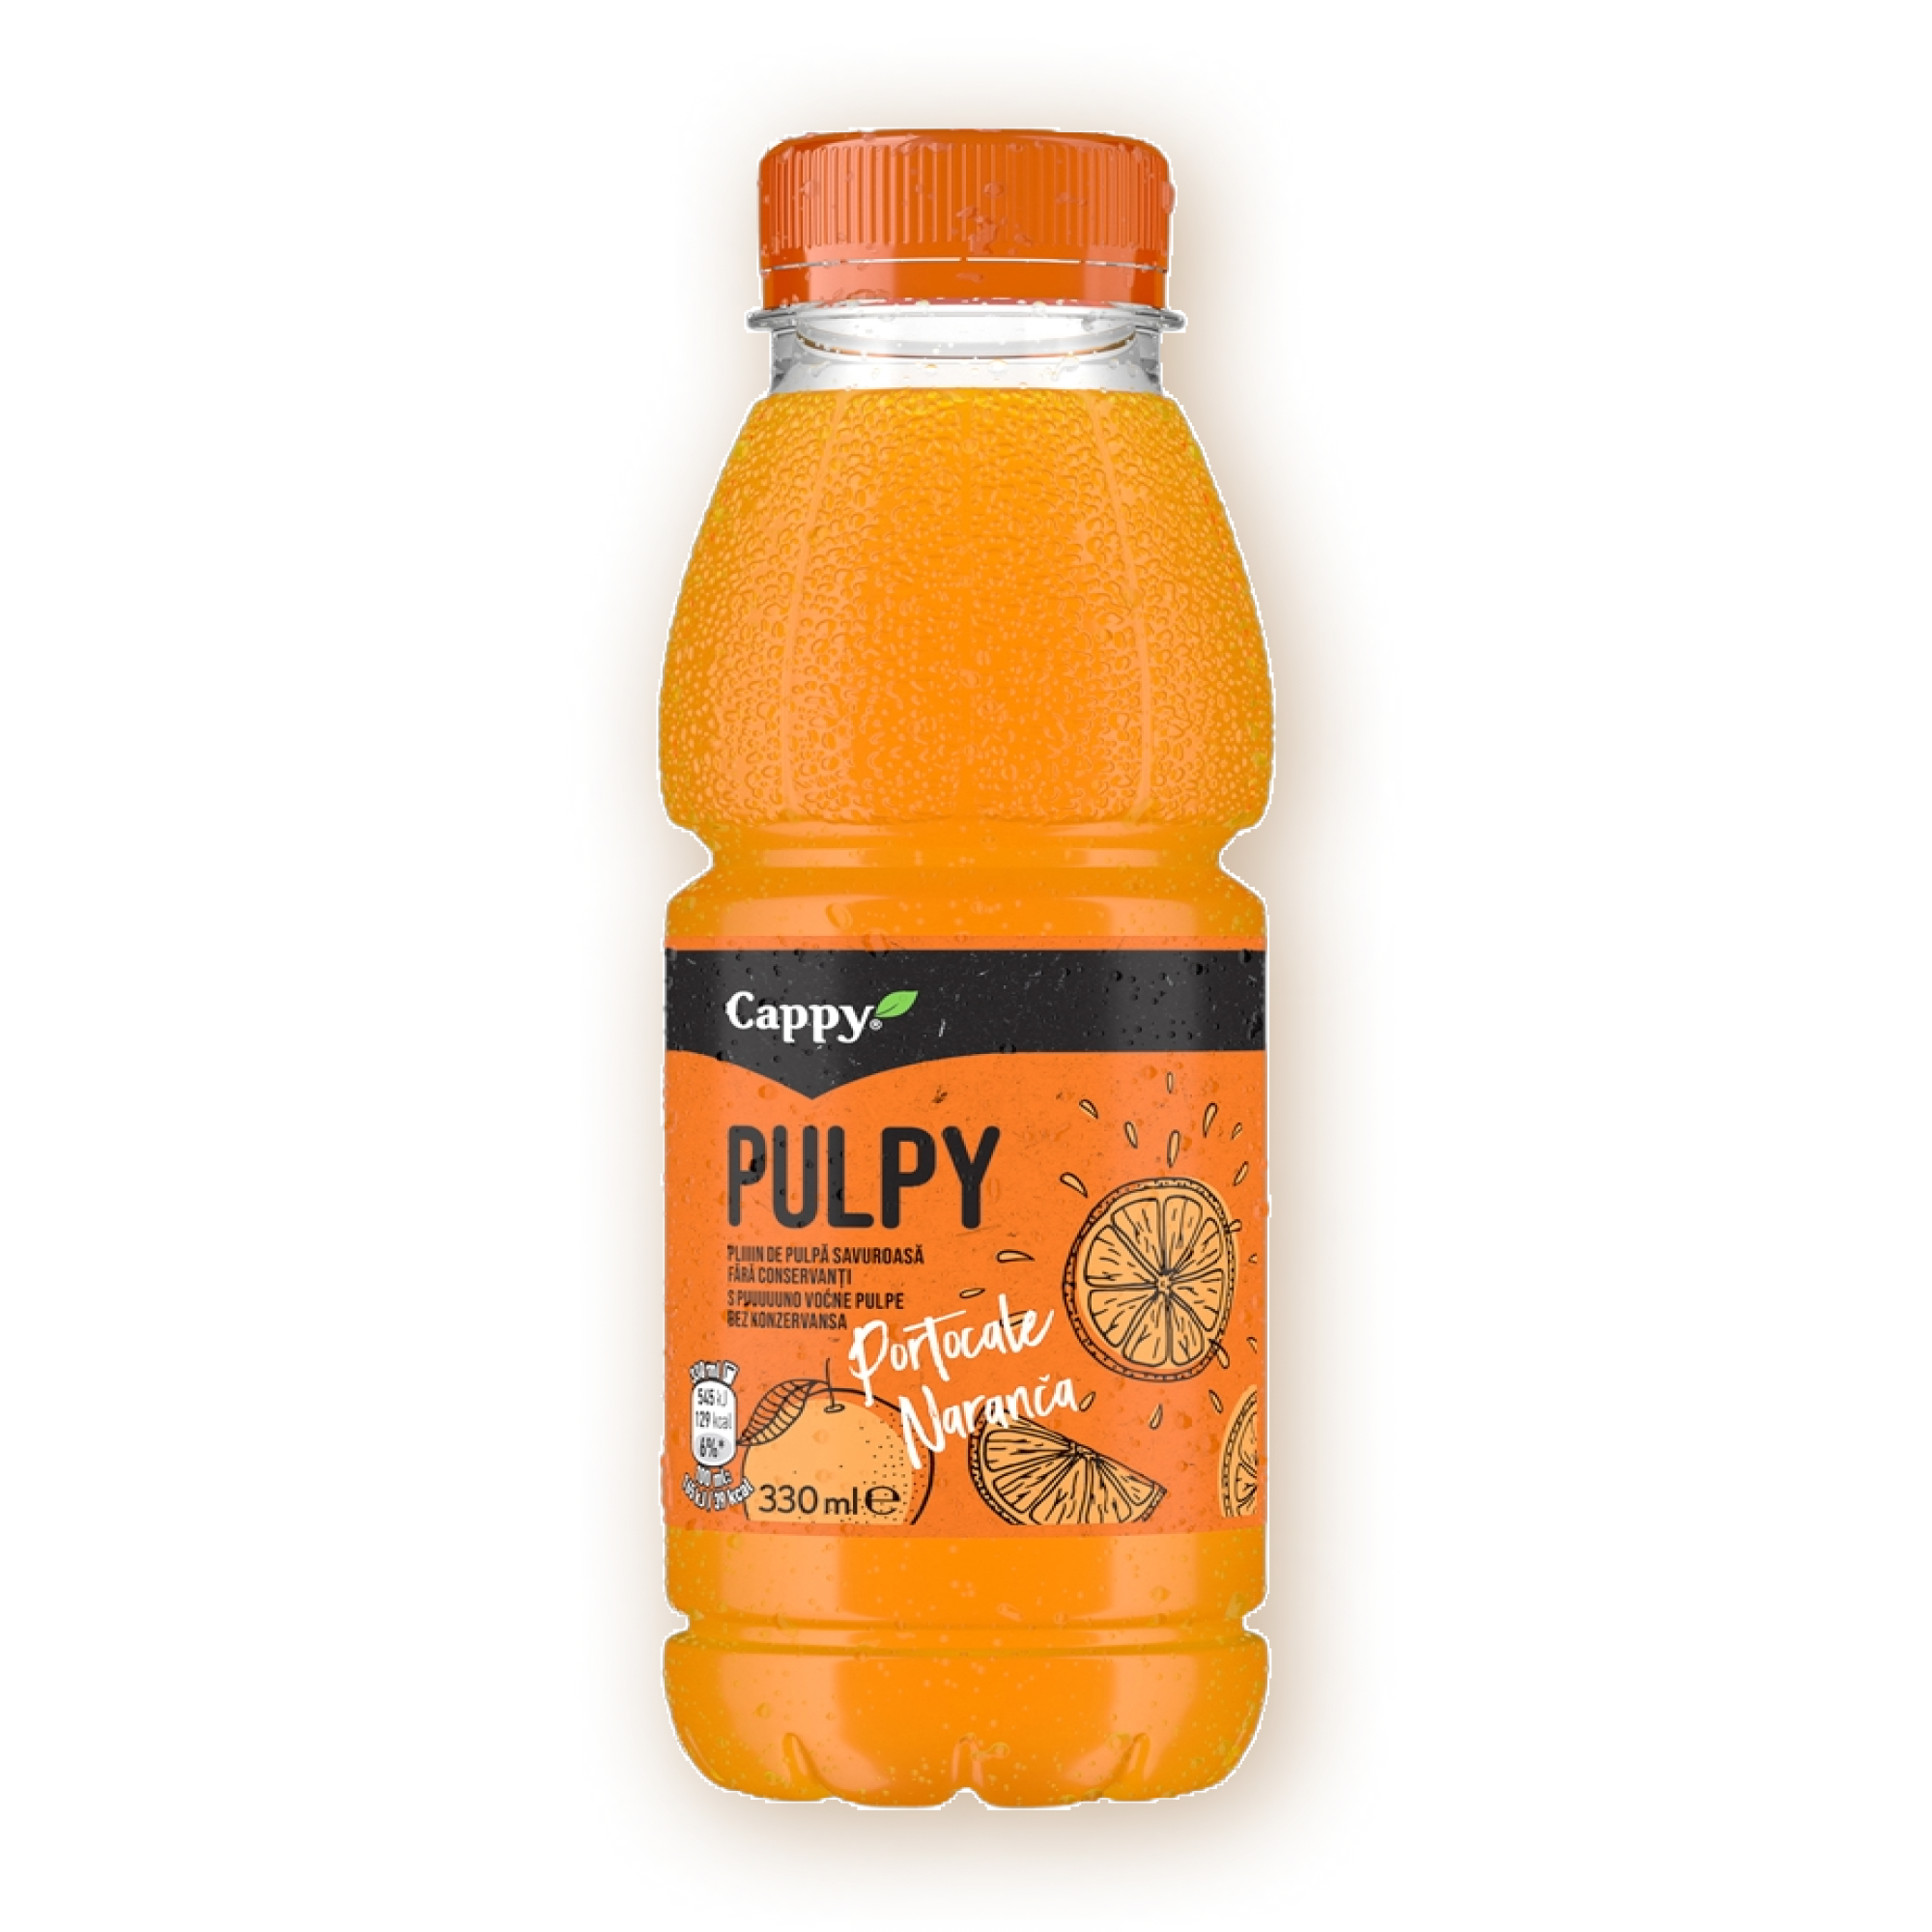 Capy Pulpy Portocale (330ml)